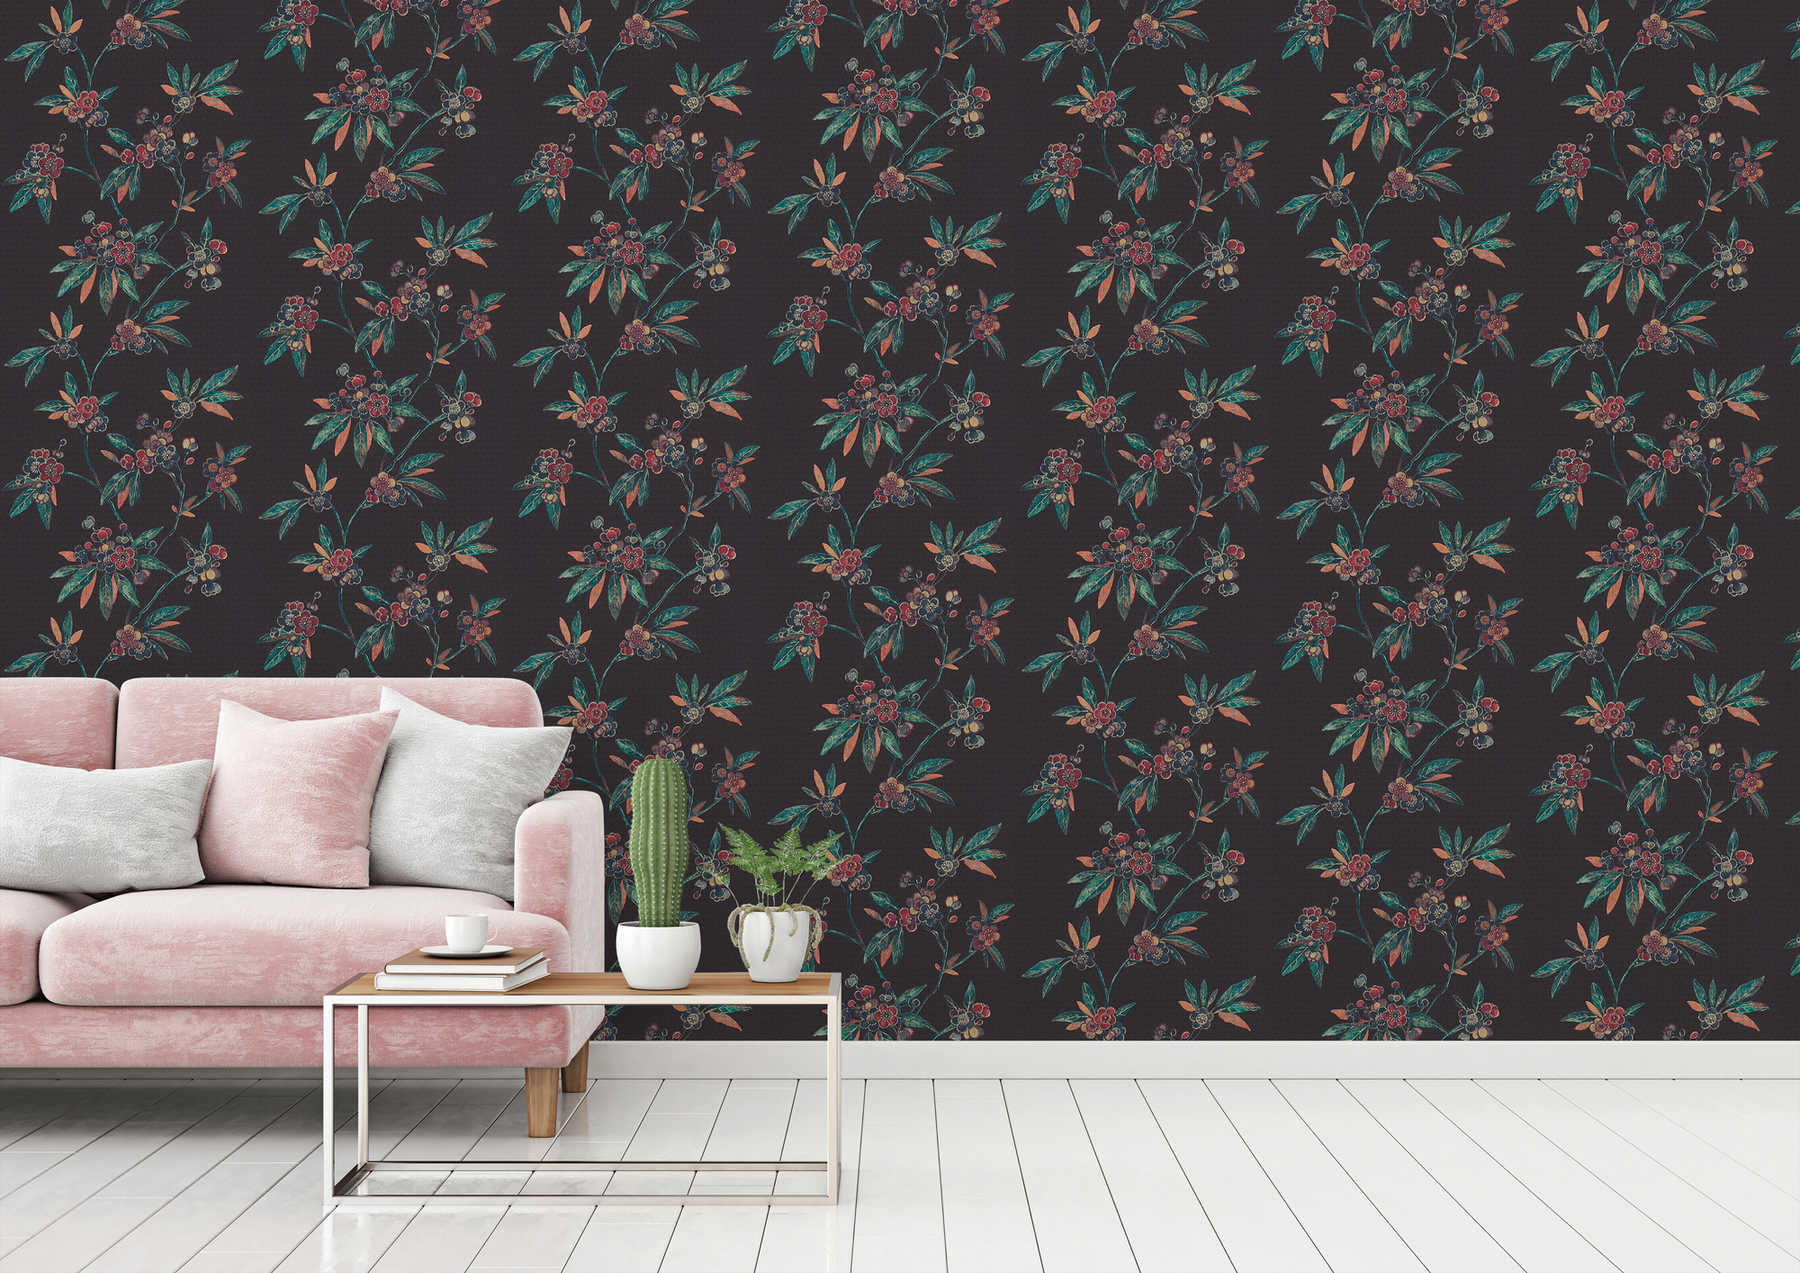             Floral wallpaper with flower tendrils in Asian style - black, green, red
        